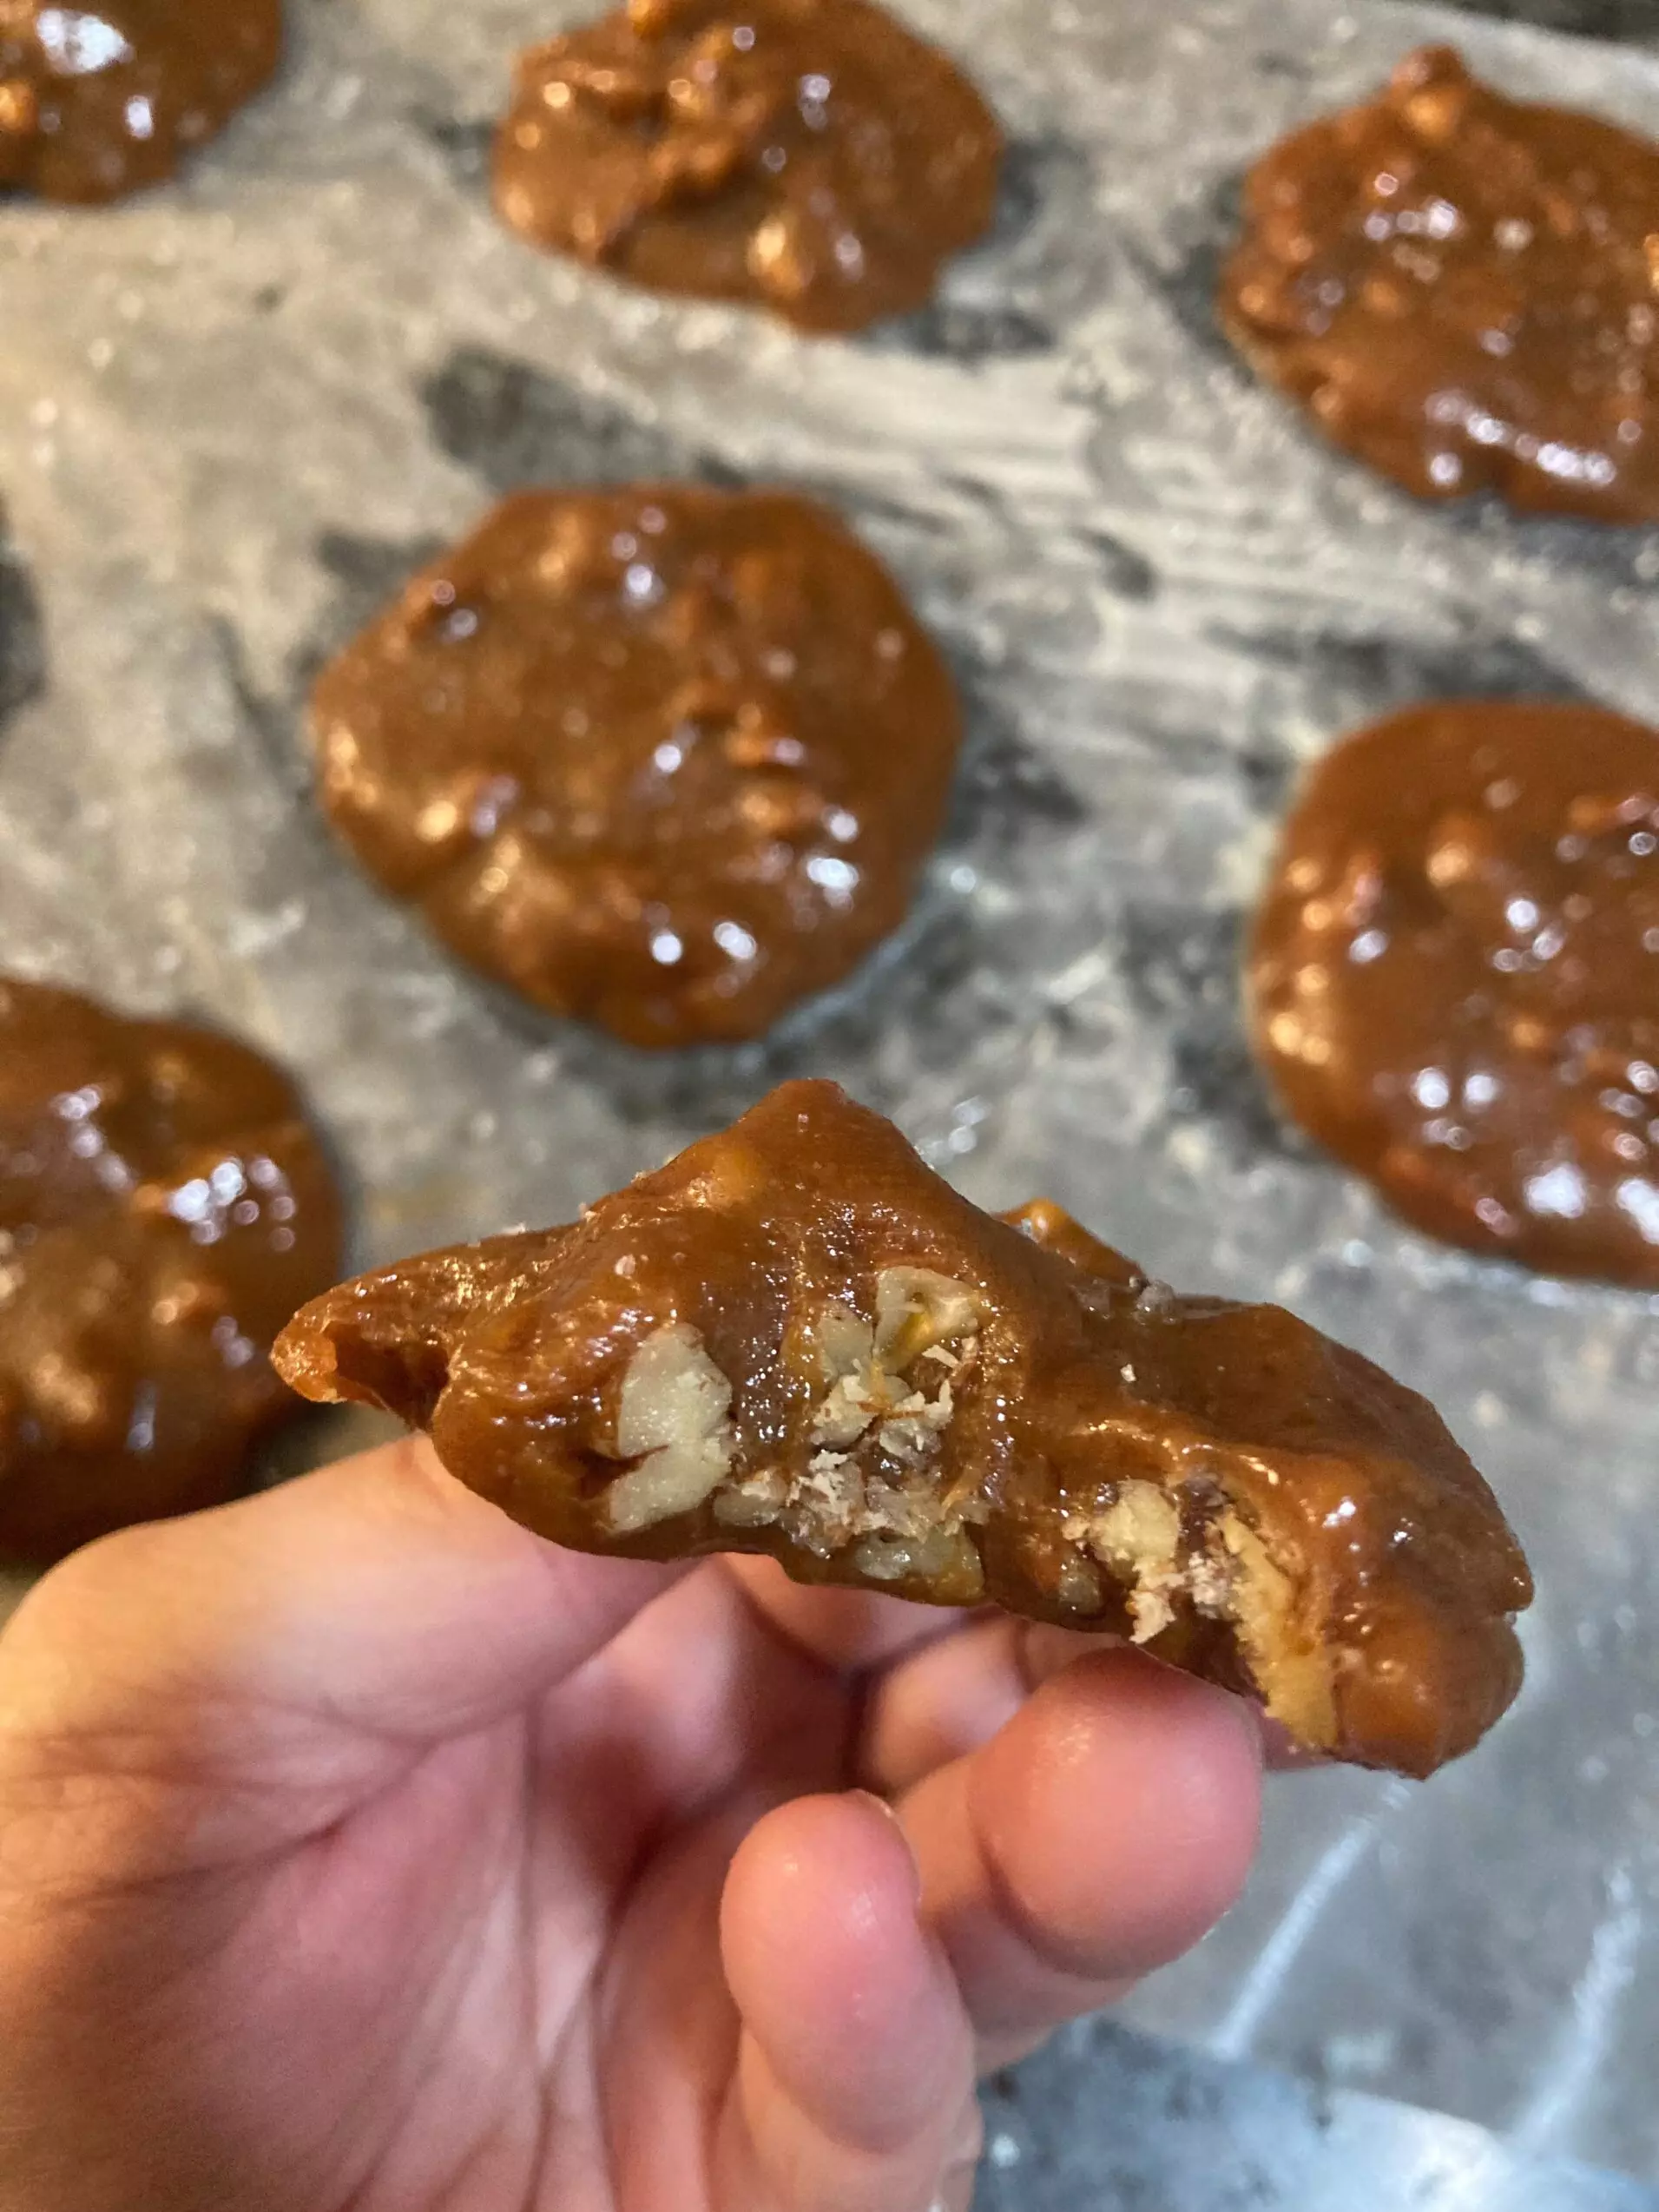 Easy Caramel Pecan Pralines from Out of the Box Baking.com